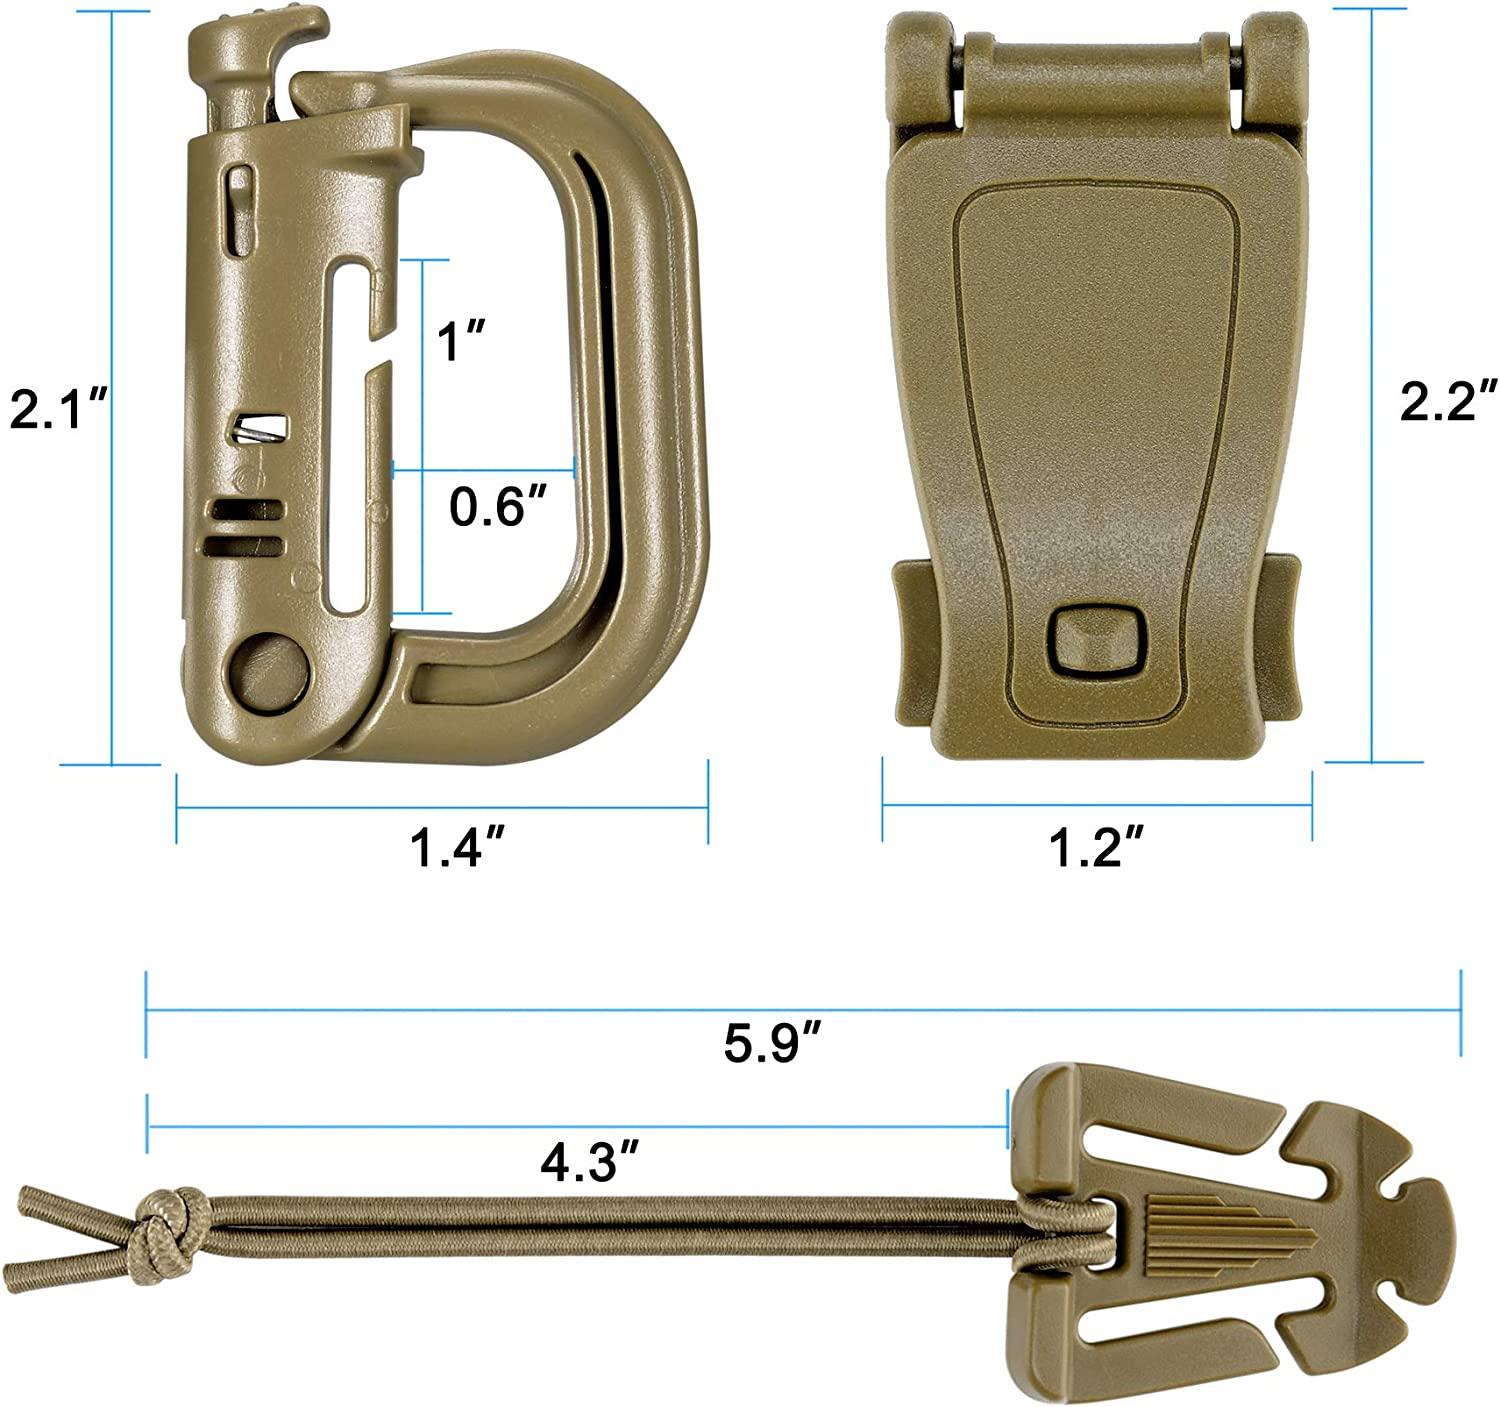 BOOSTEADY Kit of 30 Attachments for Molle Bag Tactical Backpack Vest Belt,D-Ring  Grimloc Locking Gear Clip, Web Dominator Elastic Strings, Strap Management  Tool Buckle Pack of 30 Coyote Tan